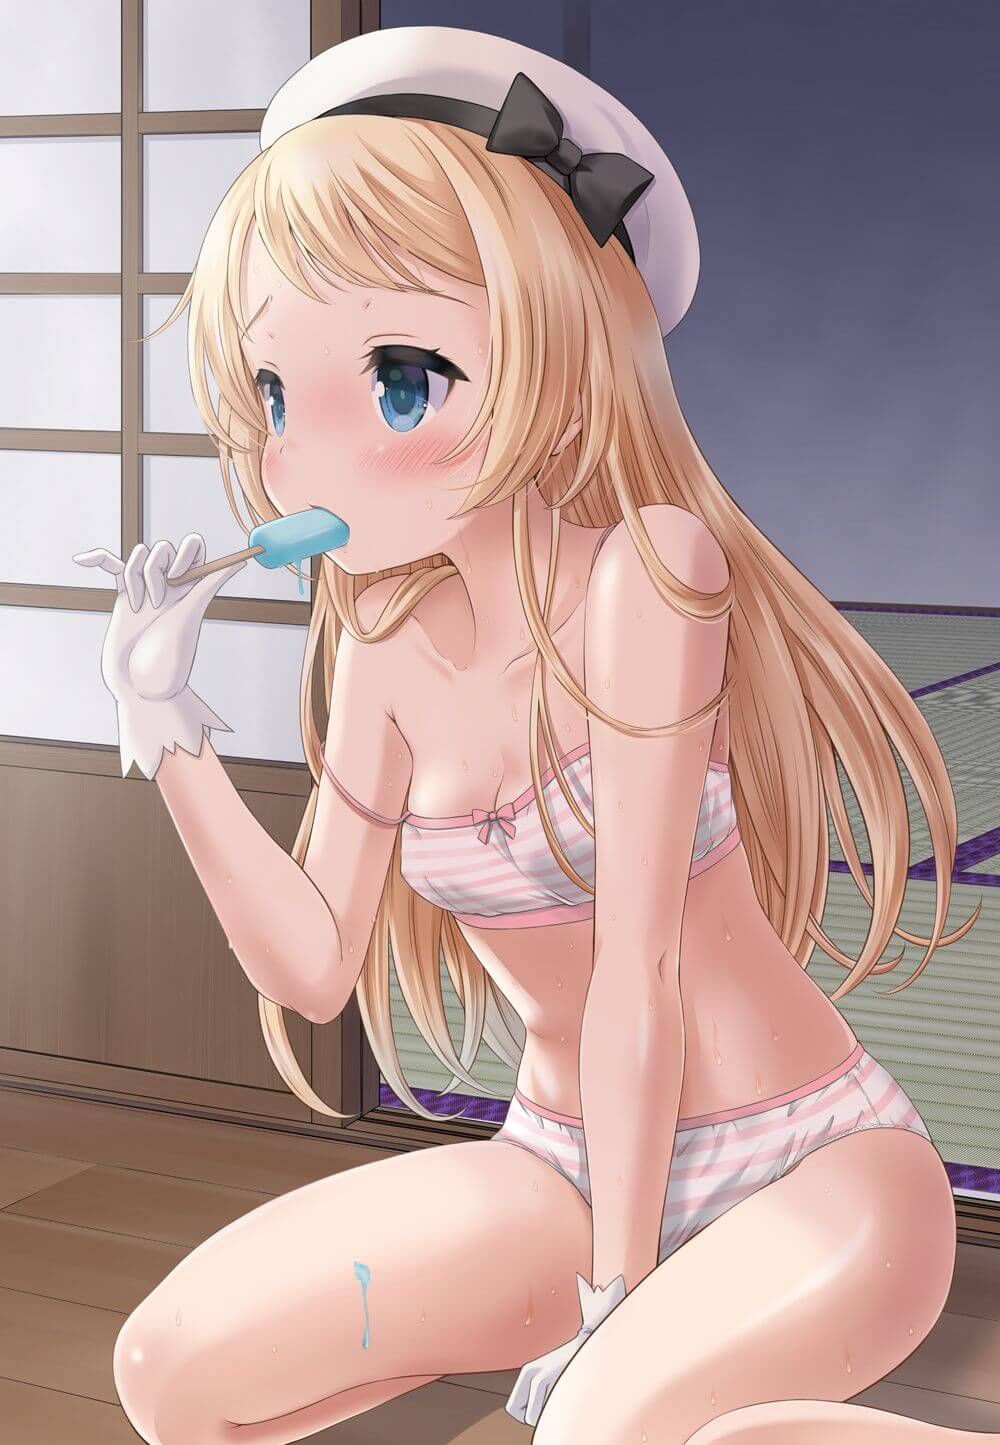 【Secondary Loli】 Erotic images of baby face girls who looked like JC/JS 2